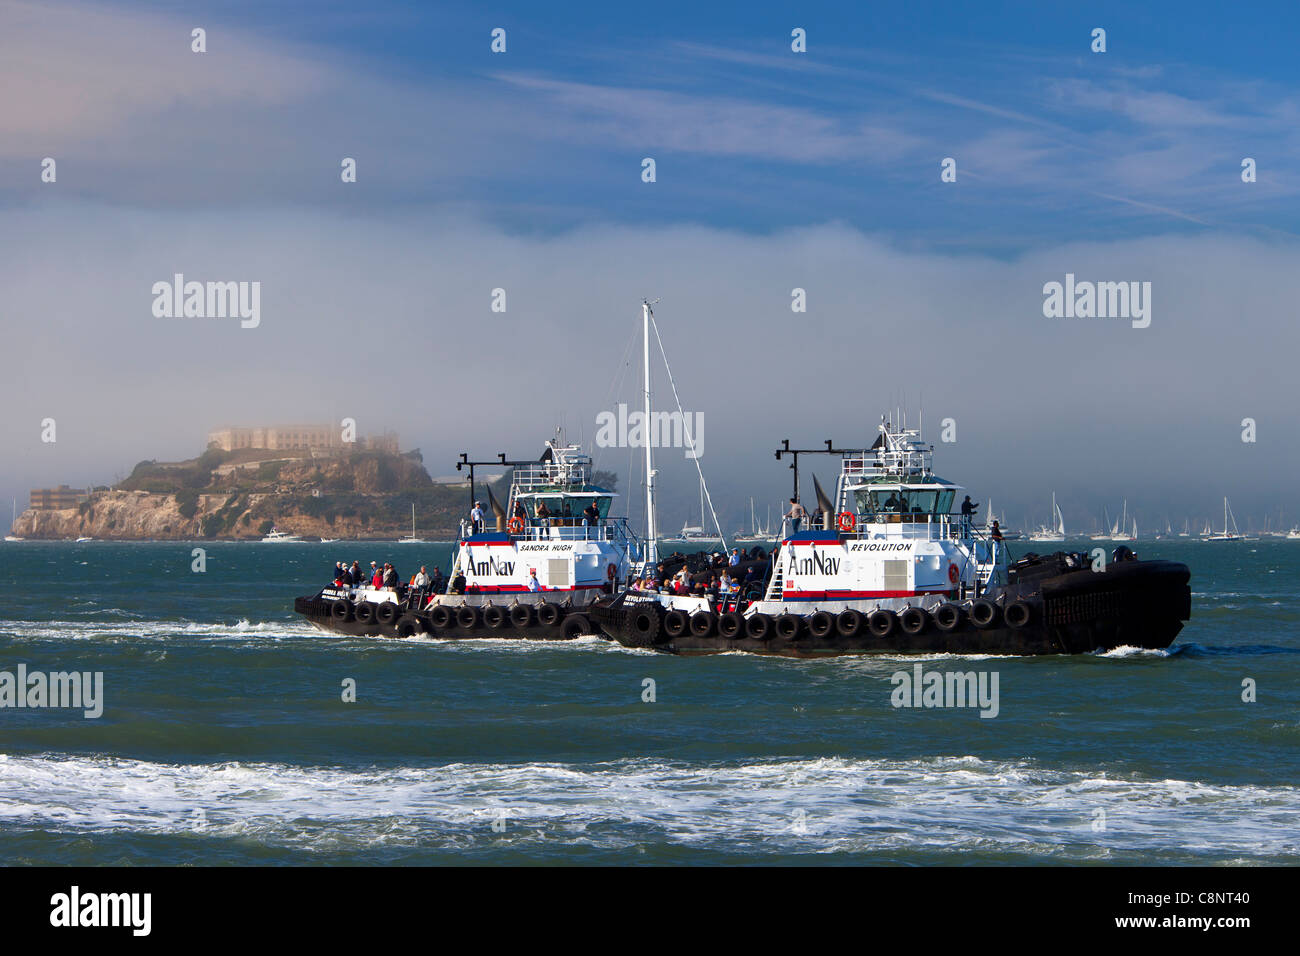 Large tugboats in San Francisco Bay during 'Fleet Week' with Alcatraz Prison beyond, California USA Stock Photo